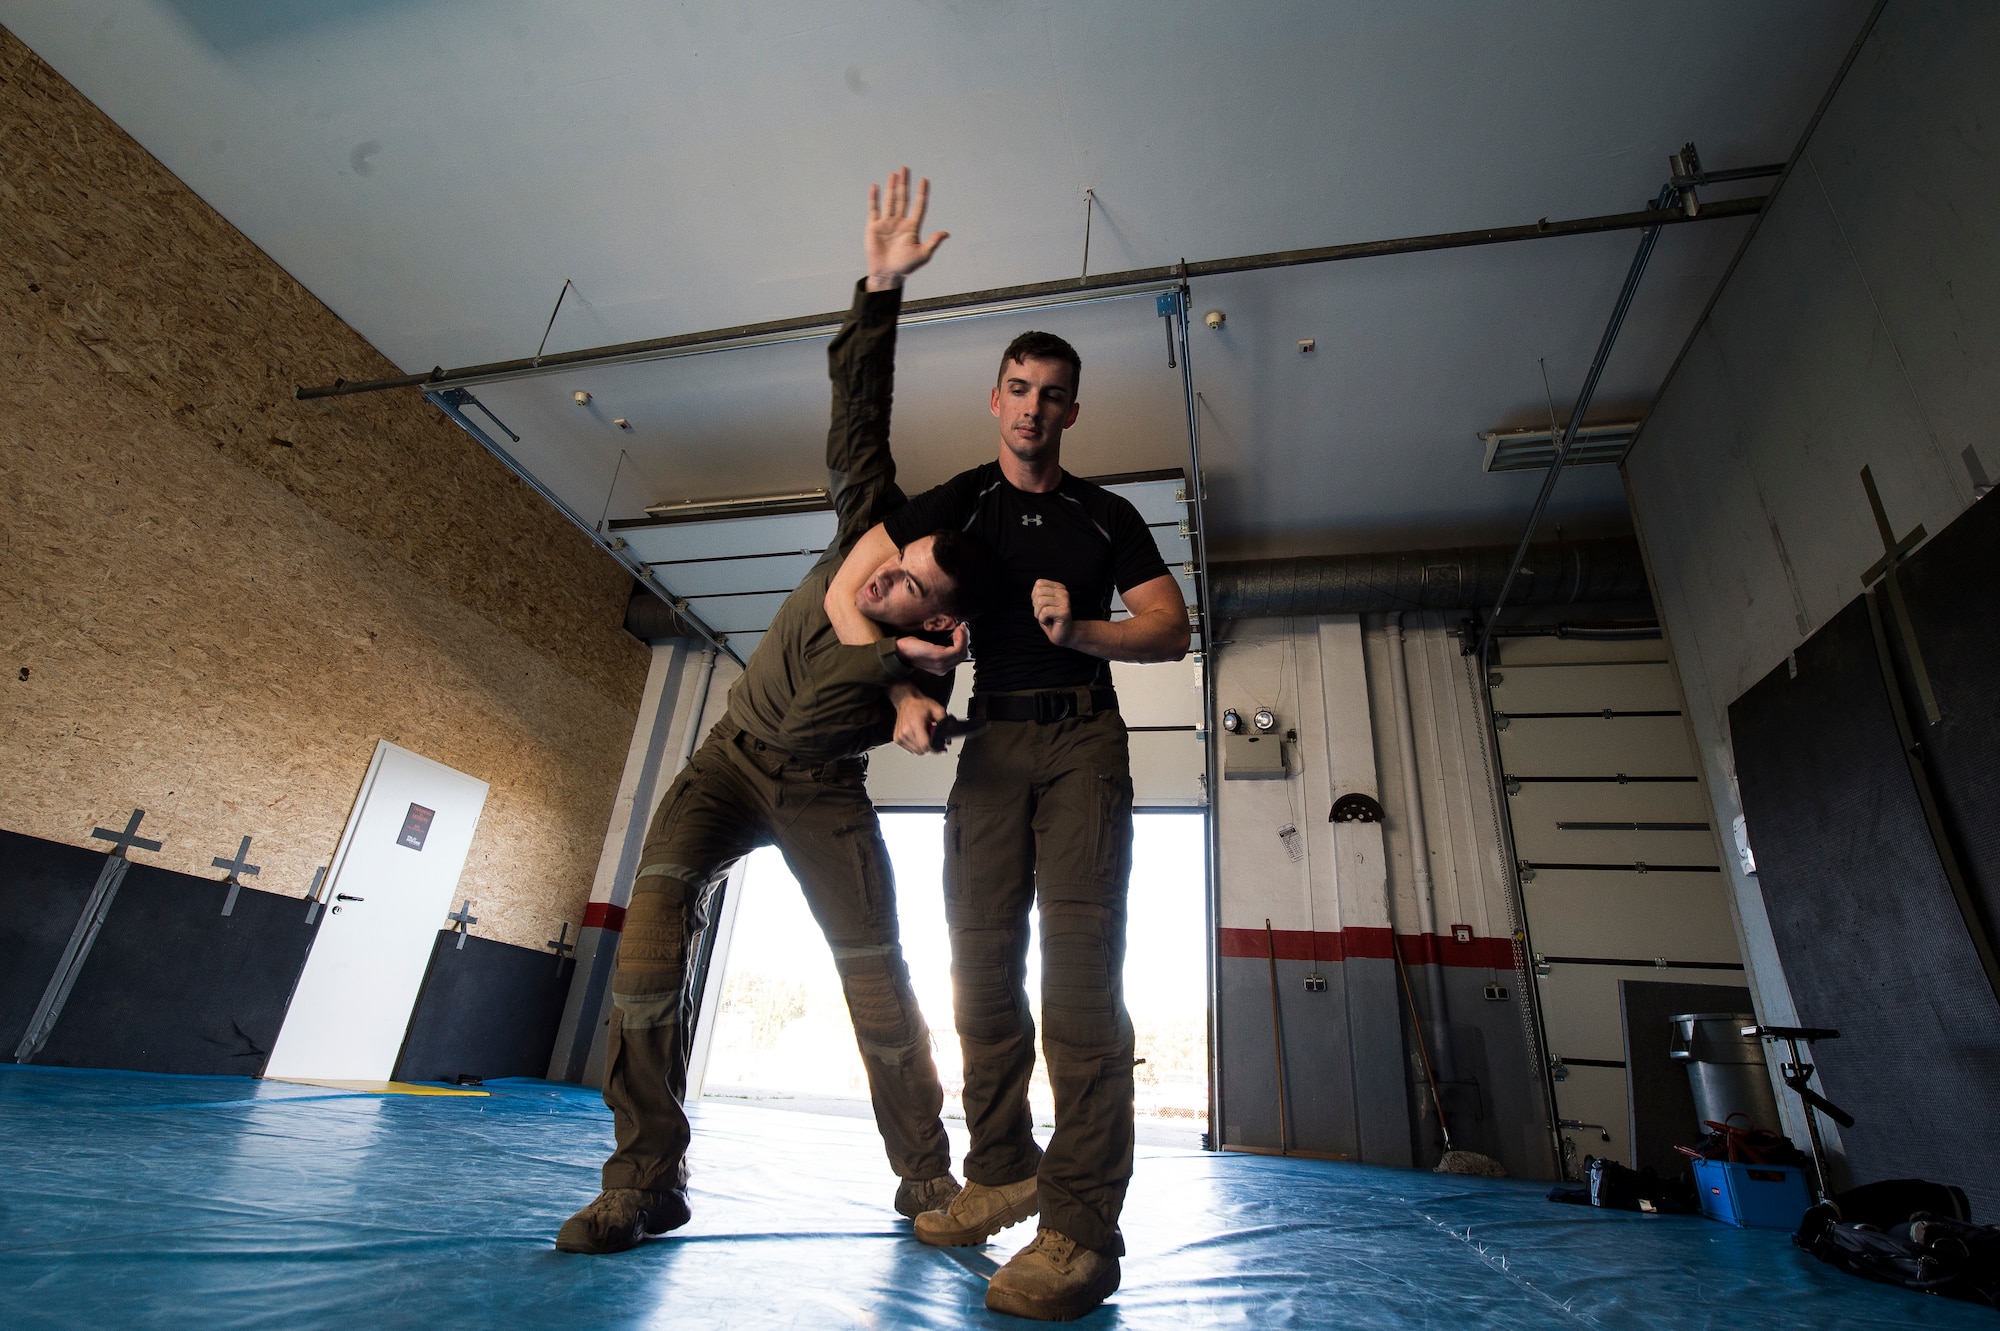 U.S. Air Force 1st Lt. Stephen Cromp, 569th U.S. Forces Police Squadron operations officer and Emergency Services Team leader, demonstrates an escape move against U.S. Air Force Staff Sgt. Brock Miller, 569th USFPS desk sergeant and EST team member, during a counter-knife training at Kapaun Air Station, Germany, Sept. 4, 2019. During the training, Cromp demonstrated a number of counter maneuvers designed to work against an adversary wielding a knife. (U.S. Air Force photo by Staff Sgt. Jonathan Bass)